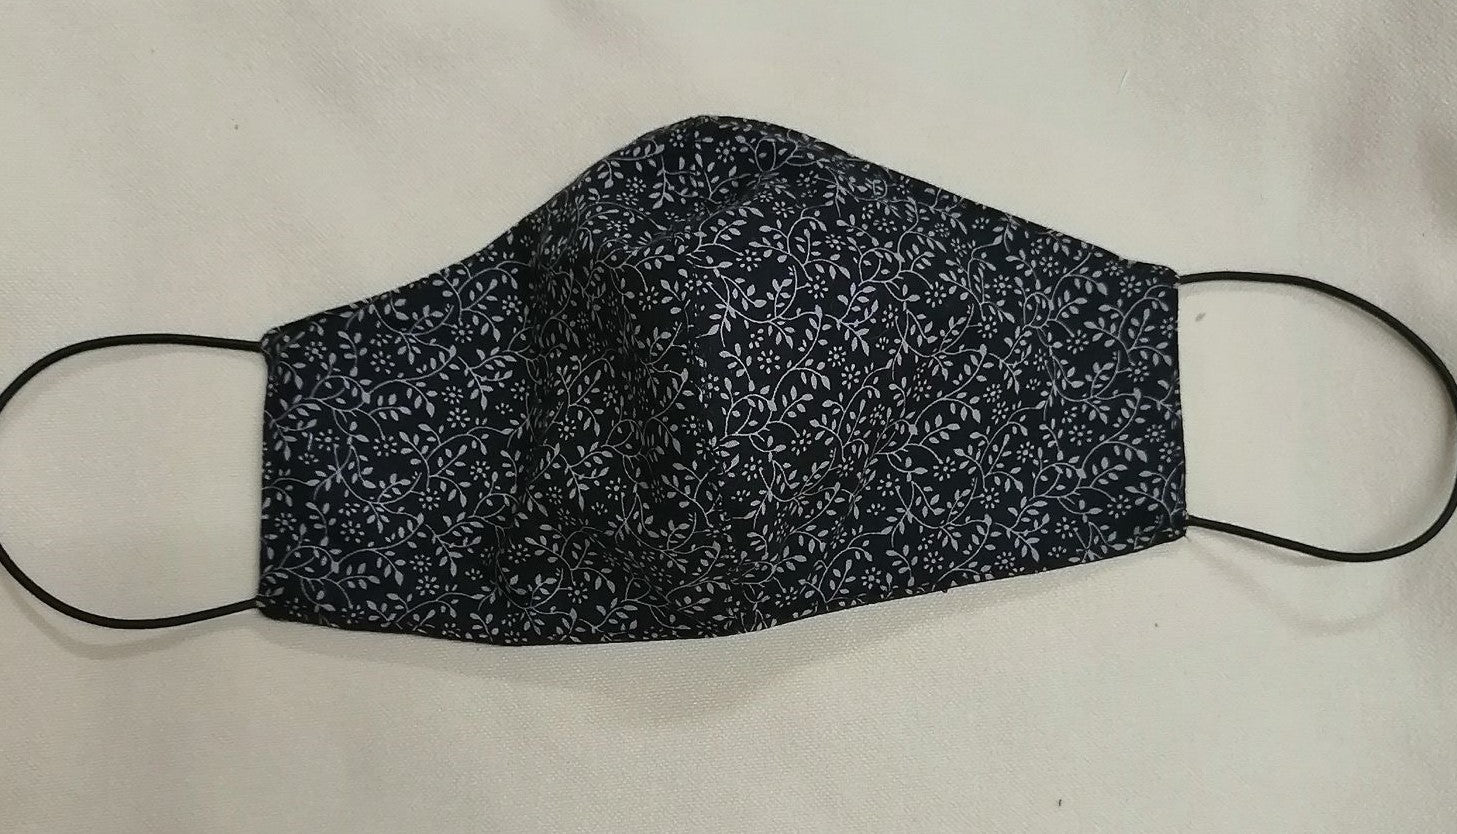 shaped facemask in black and white  ditzy lieaf design